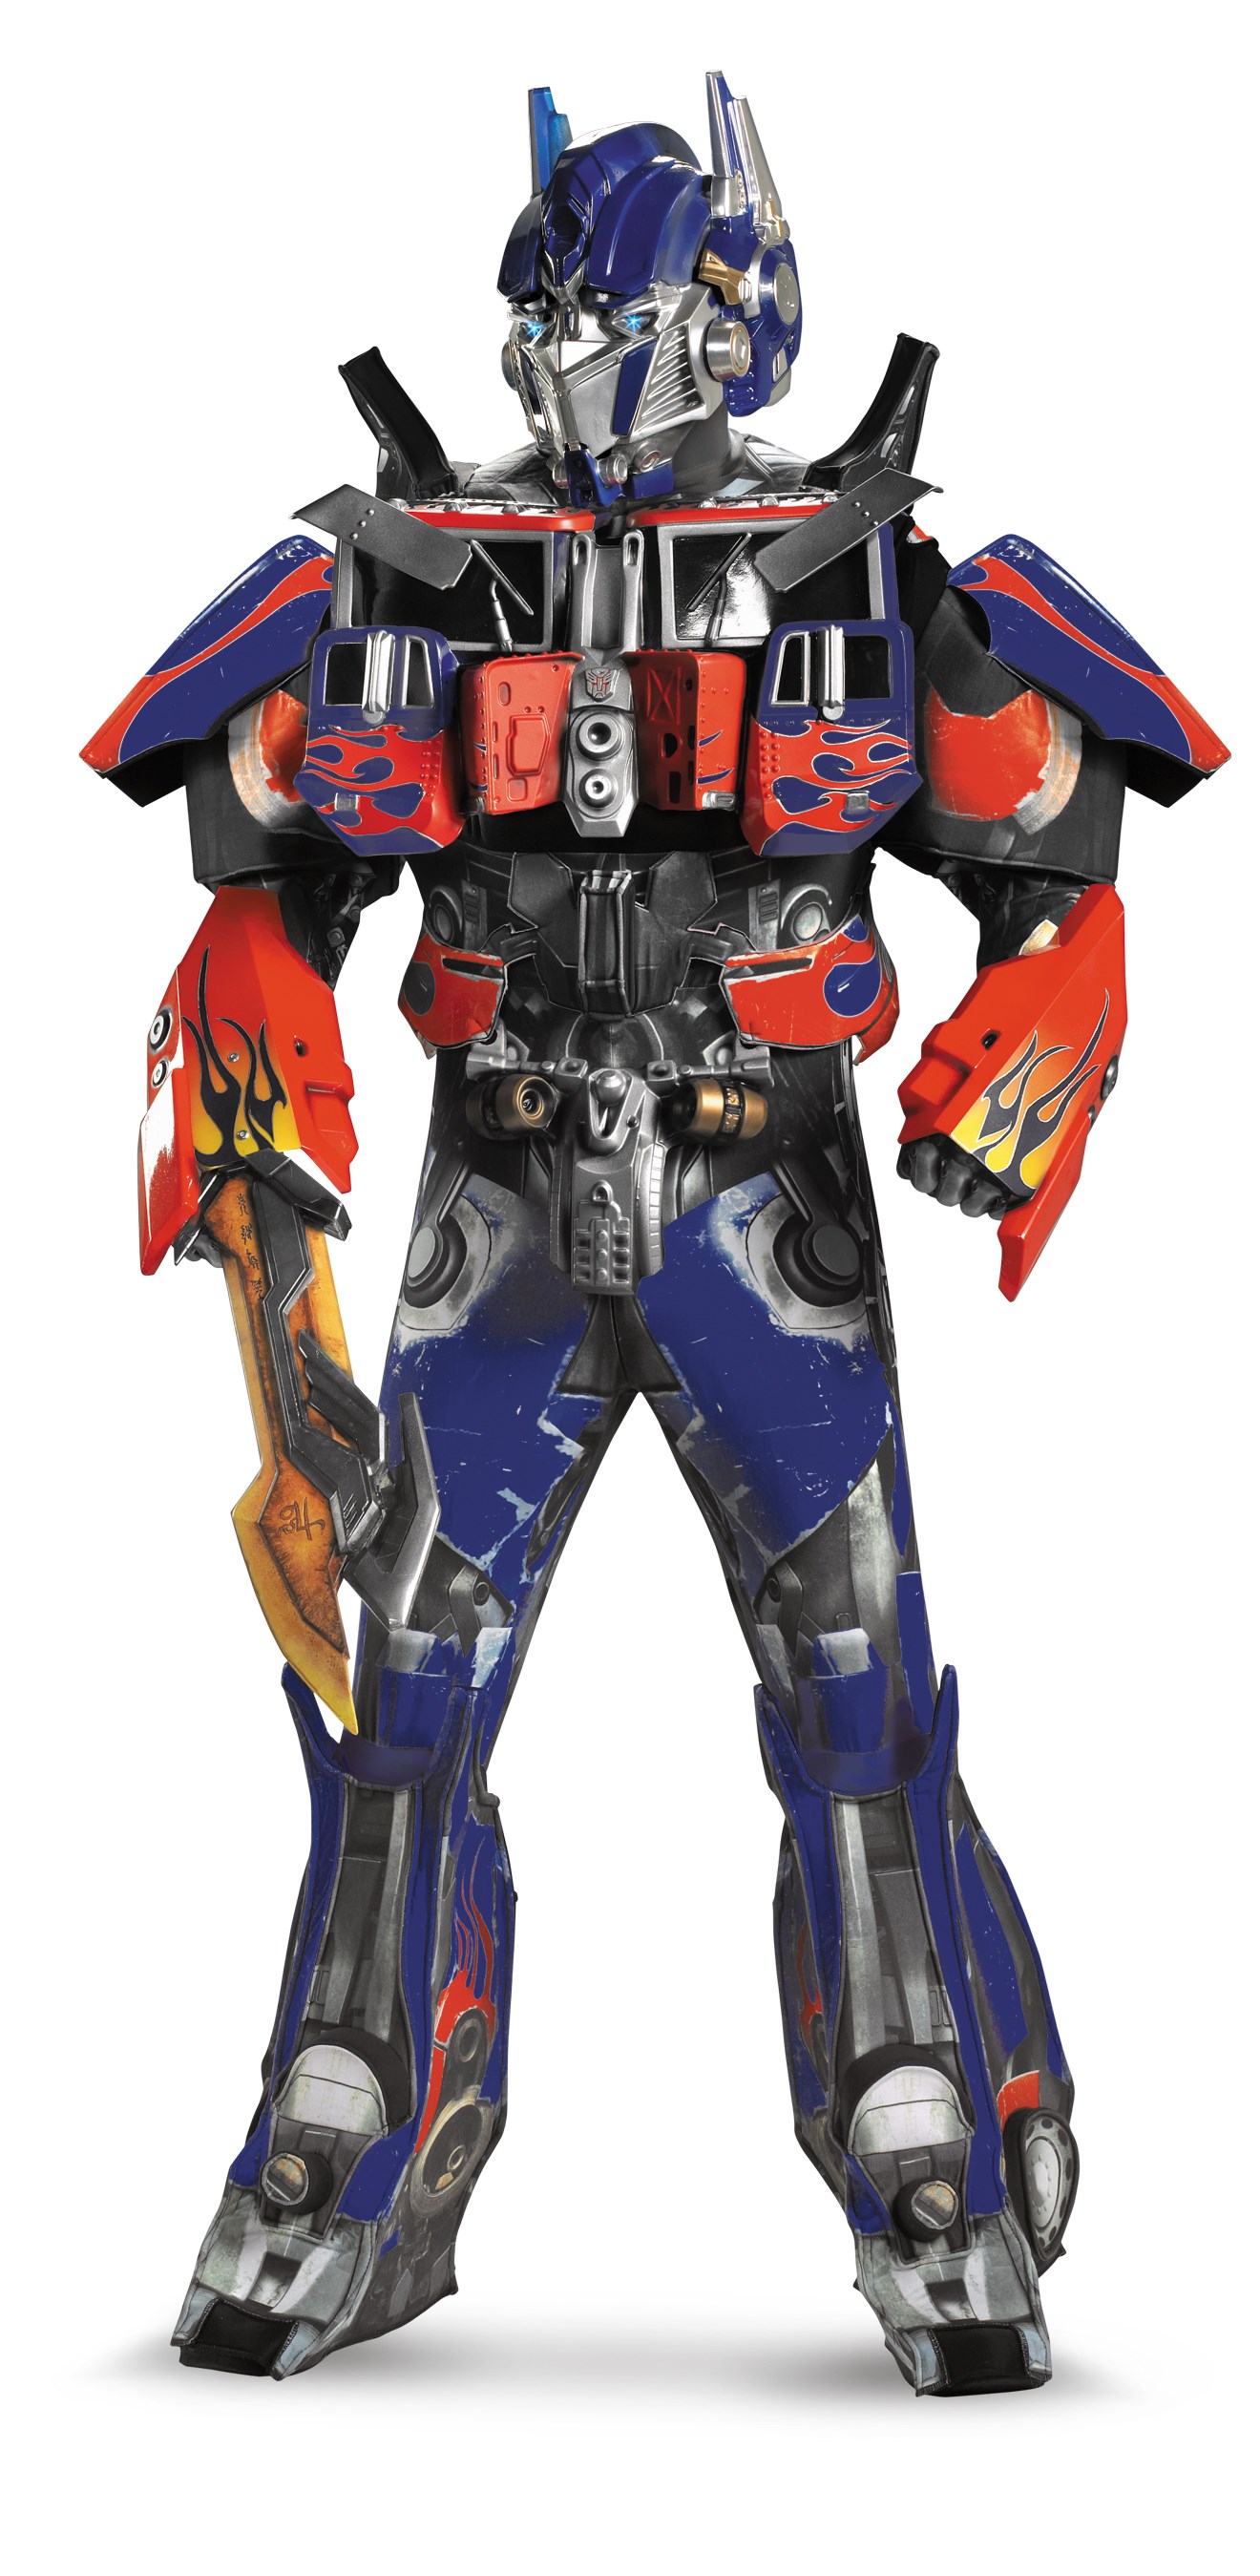 Transformers 3 Dark Of The Moon Movie - Optimus Prime 3D Theatrical W/ Vacuform Adult Costume